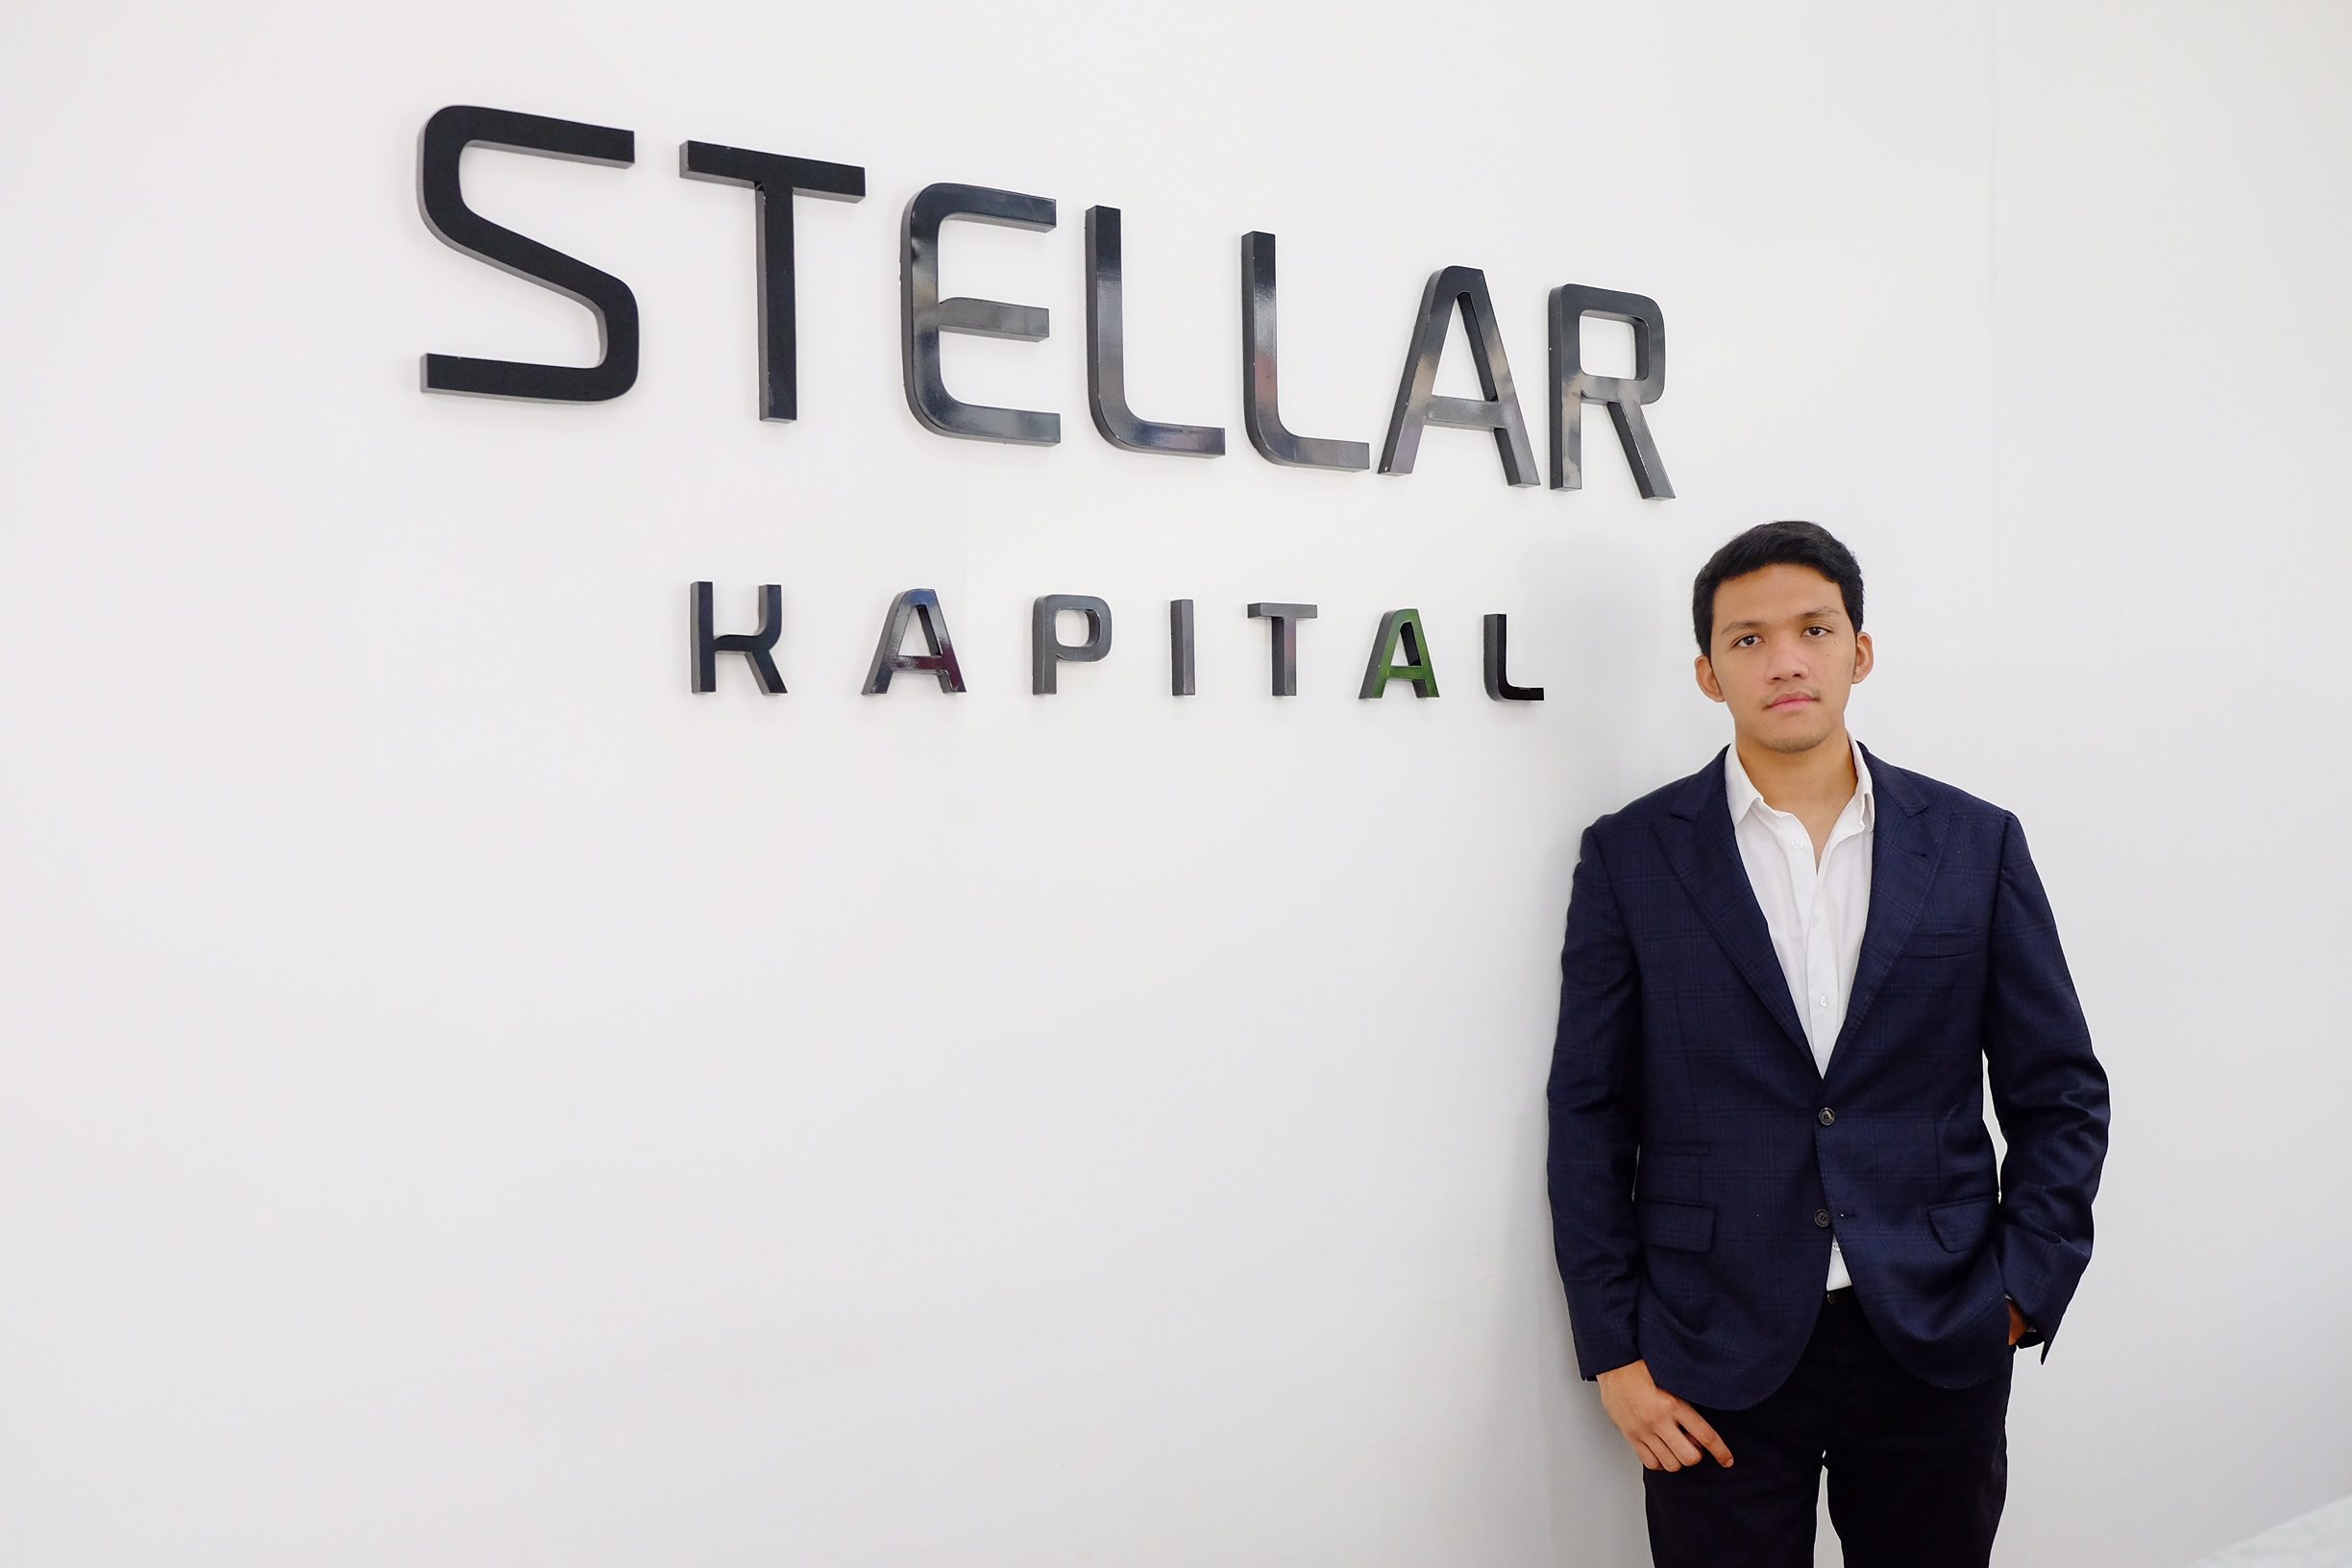 Media and content will be the next big thing in Indonesia, says Stellar Kapital's Santoso